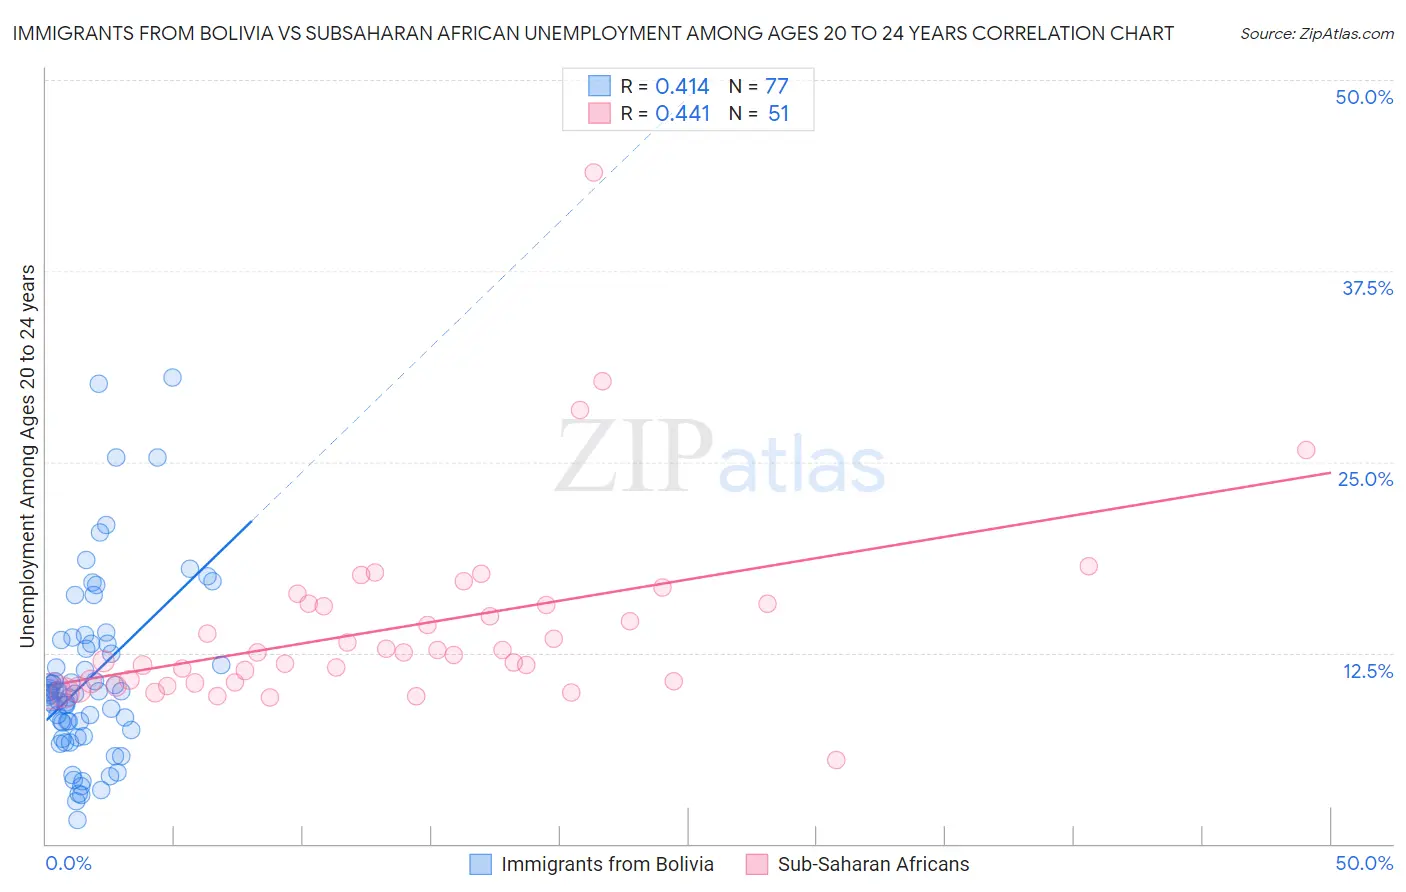 Immigrants from Bolivia vs Subsaharan African Unemployment Among Ages 20 to 24 years